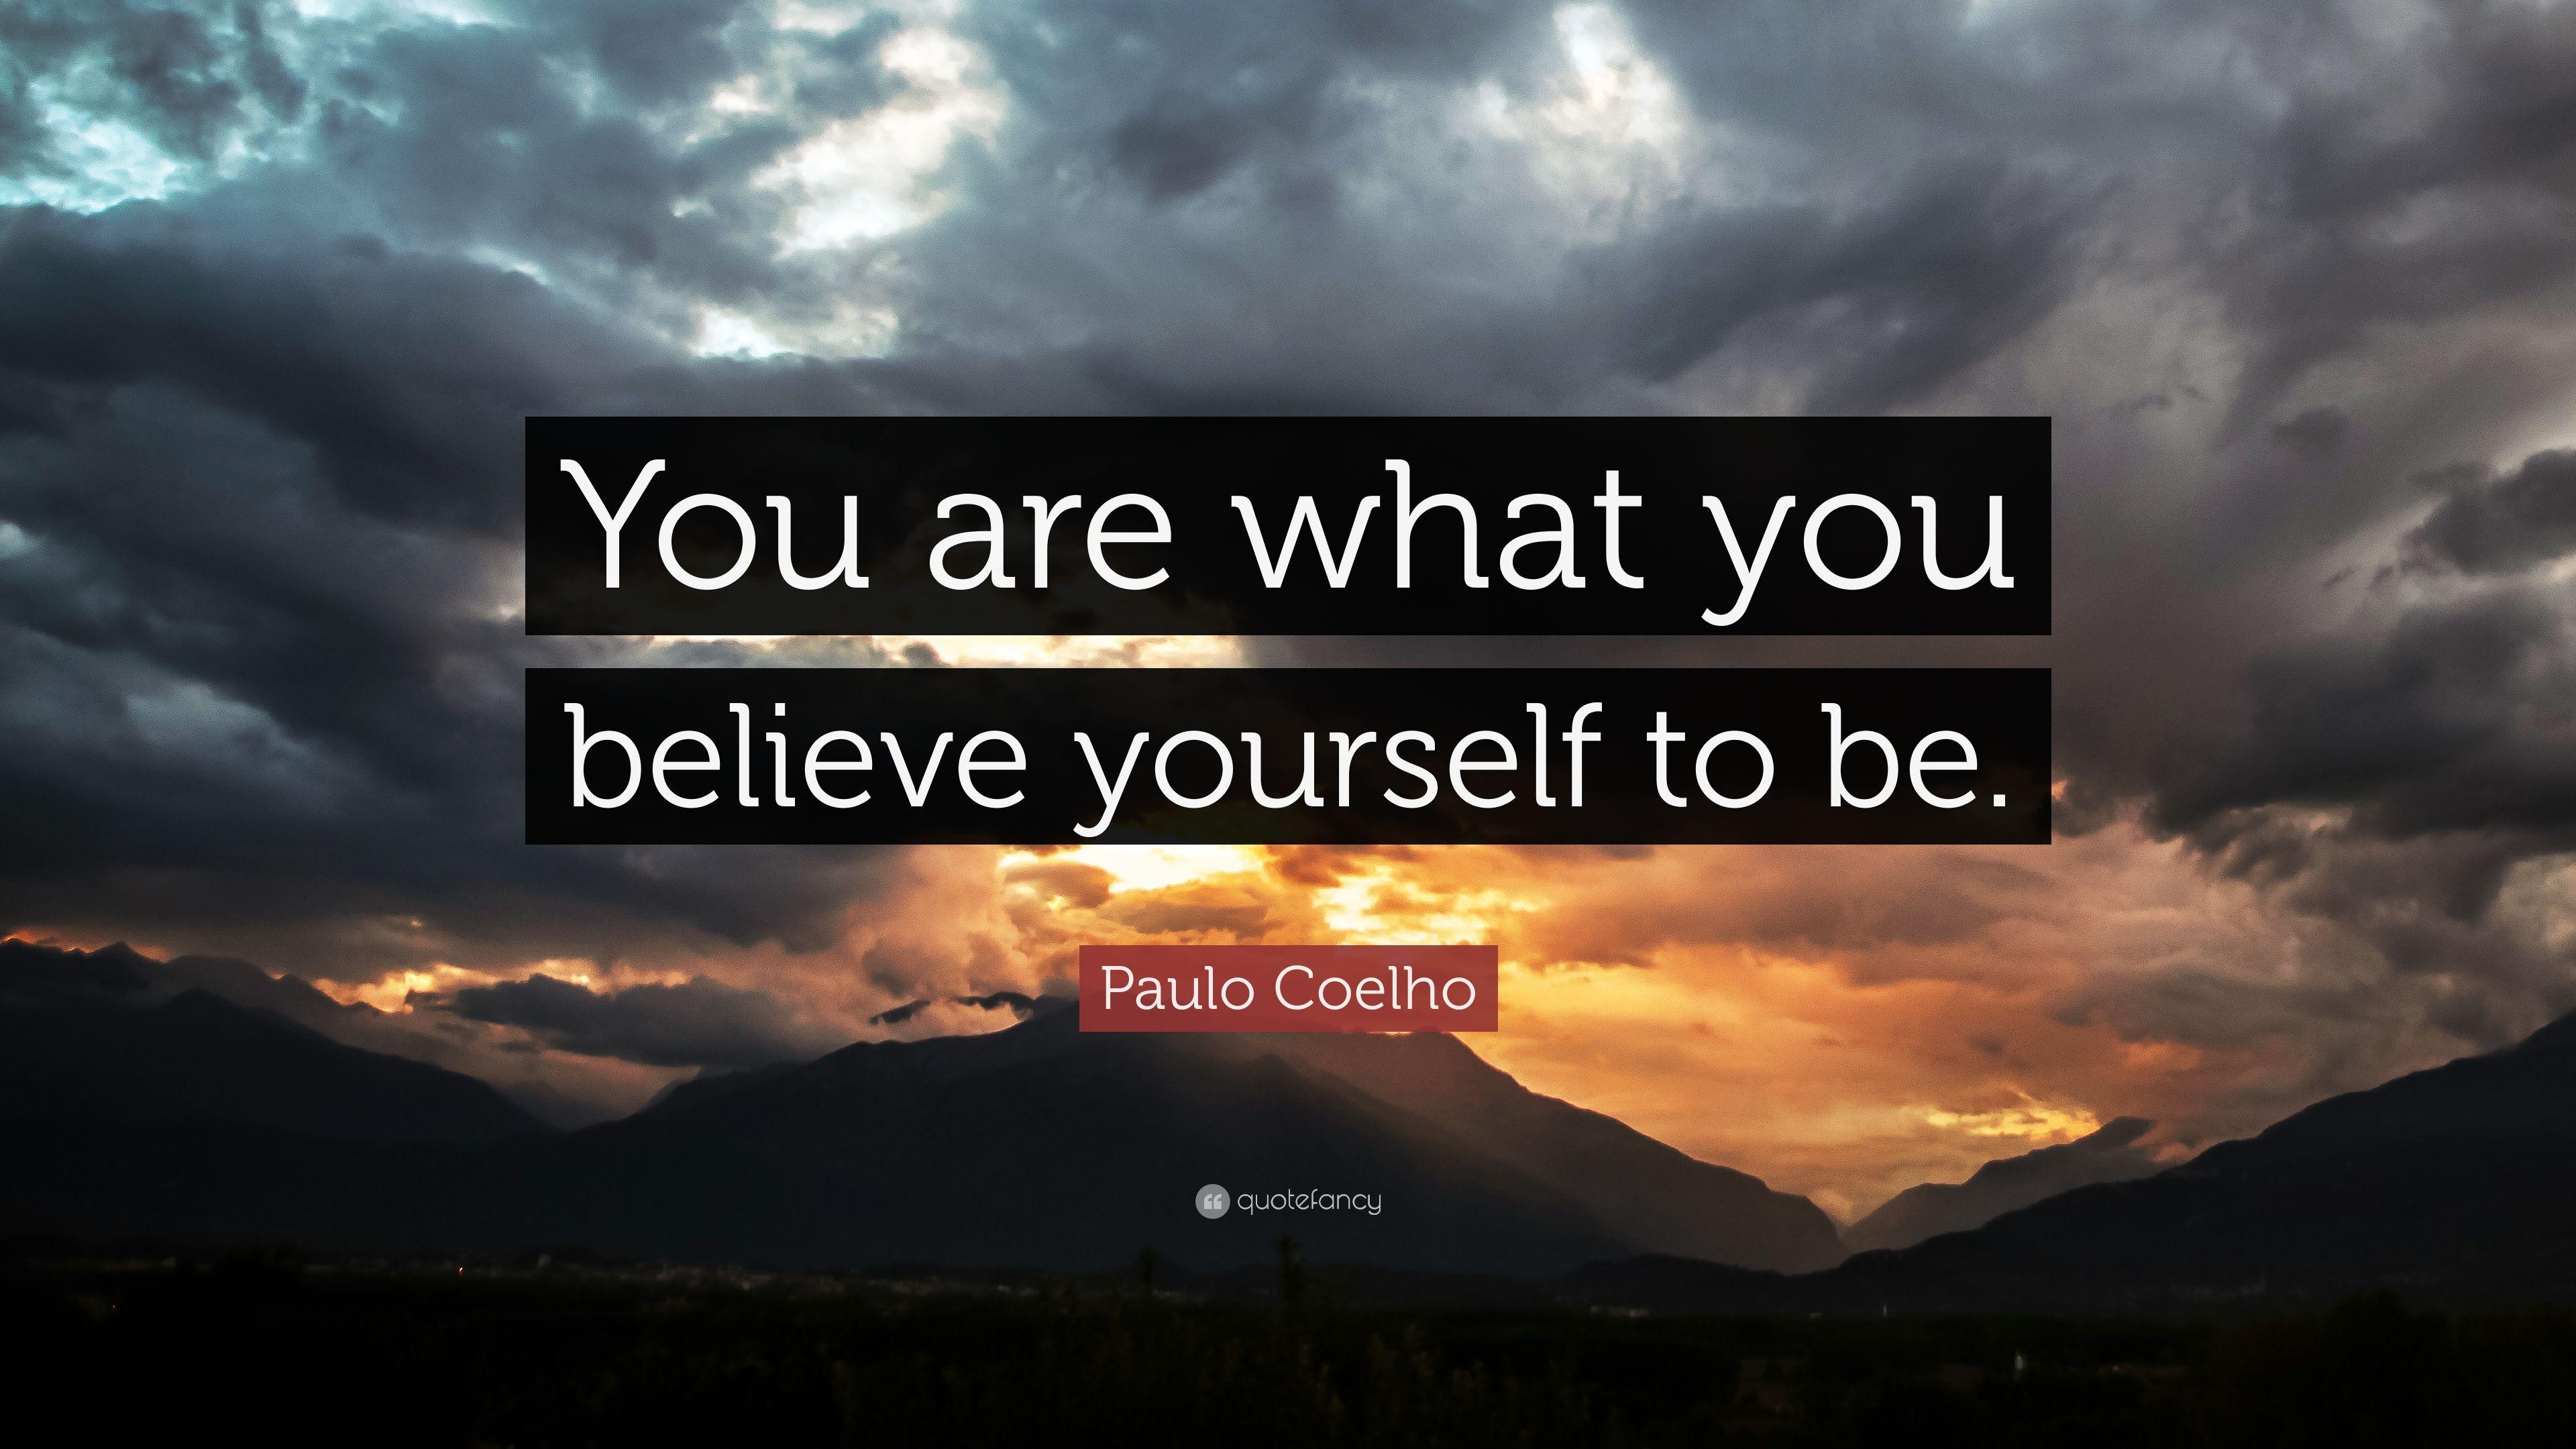 Paulo Coelho Quote: “You are what you believe yourself to be.” 20